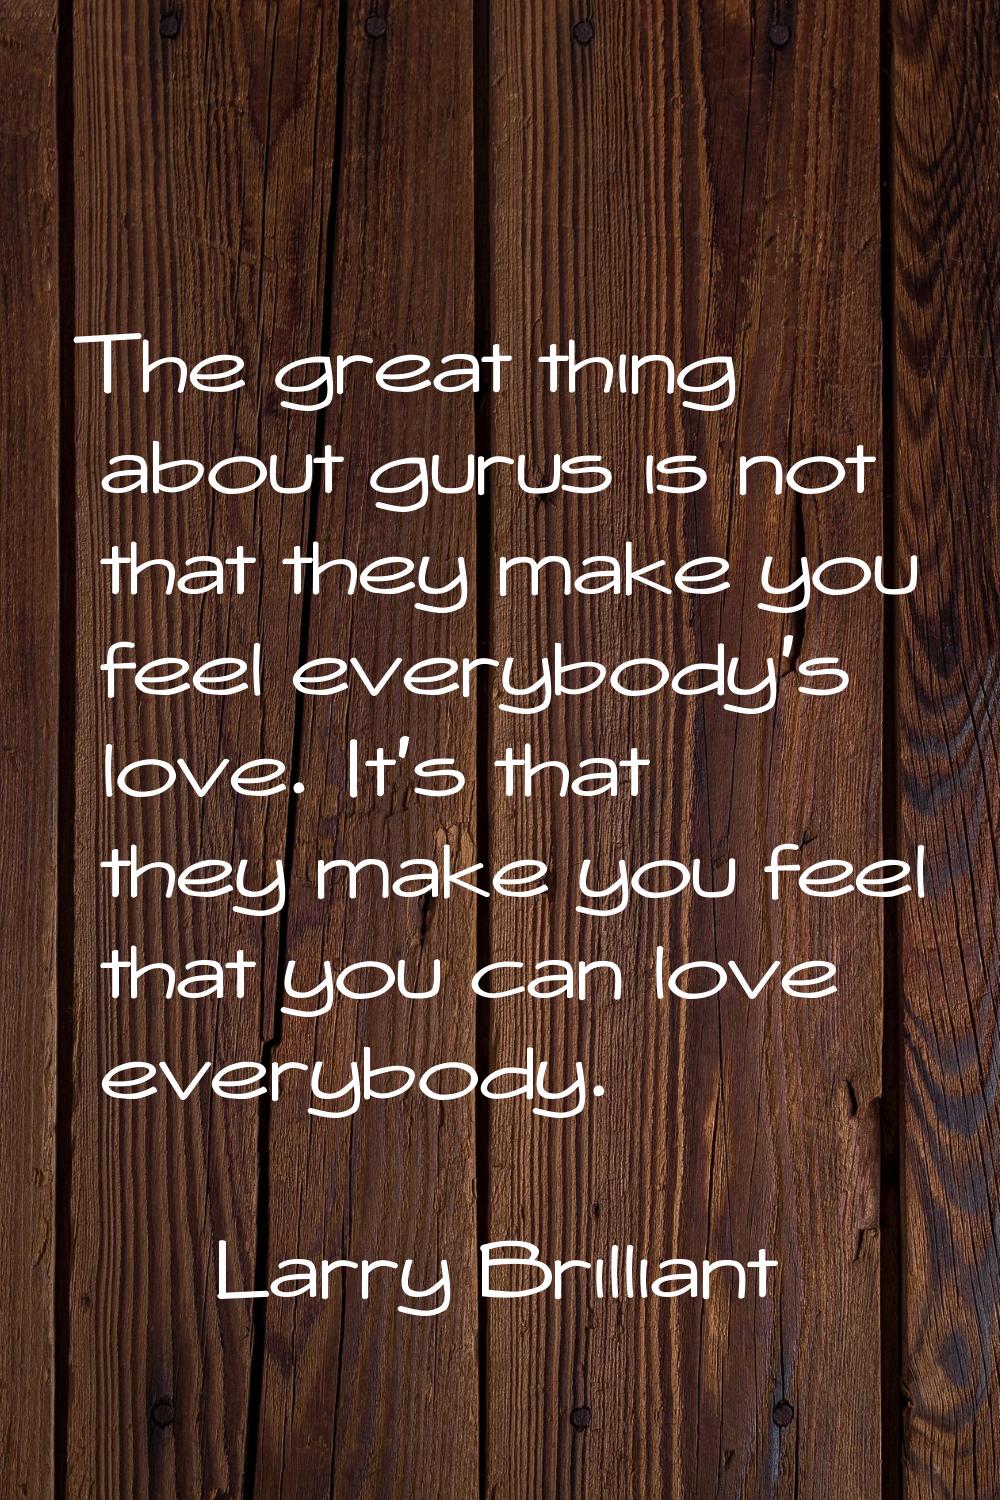 The great thing about gurus is not that they make you feel everybody's love. It's that they make yo